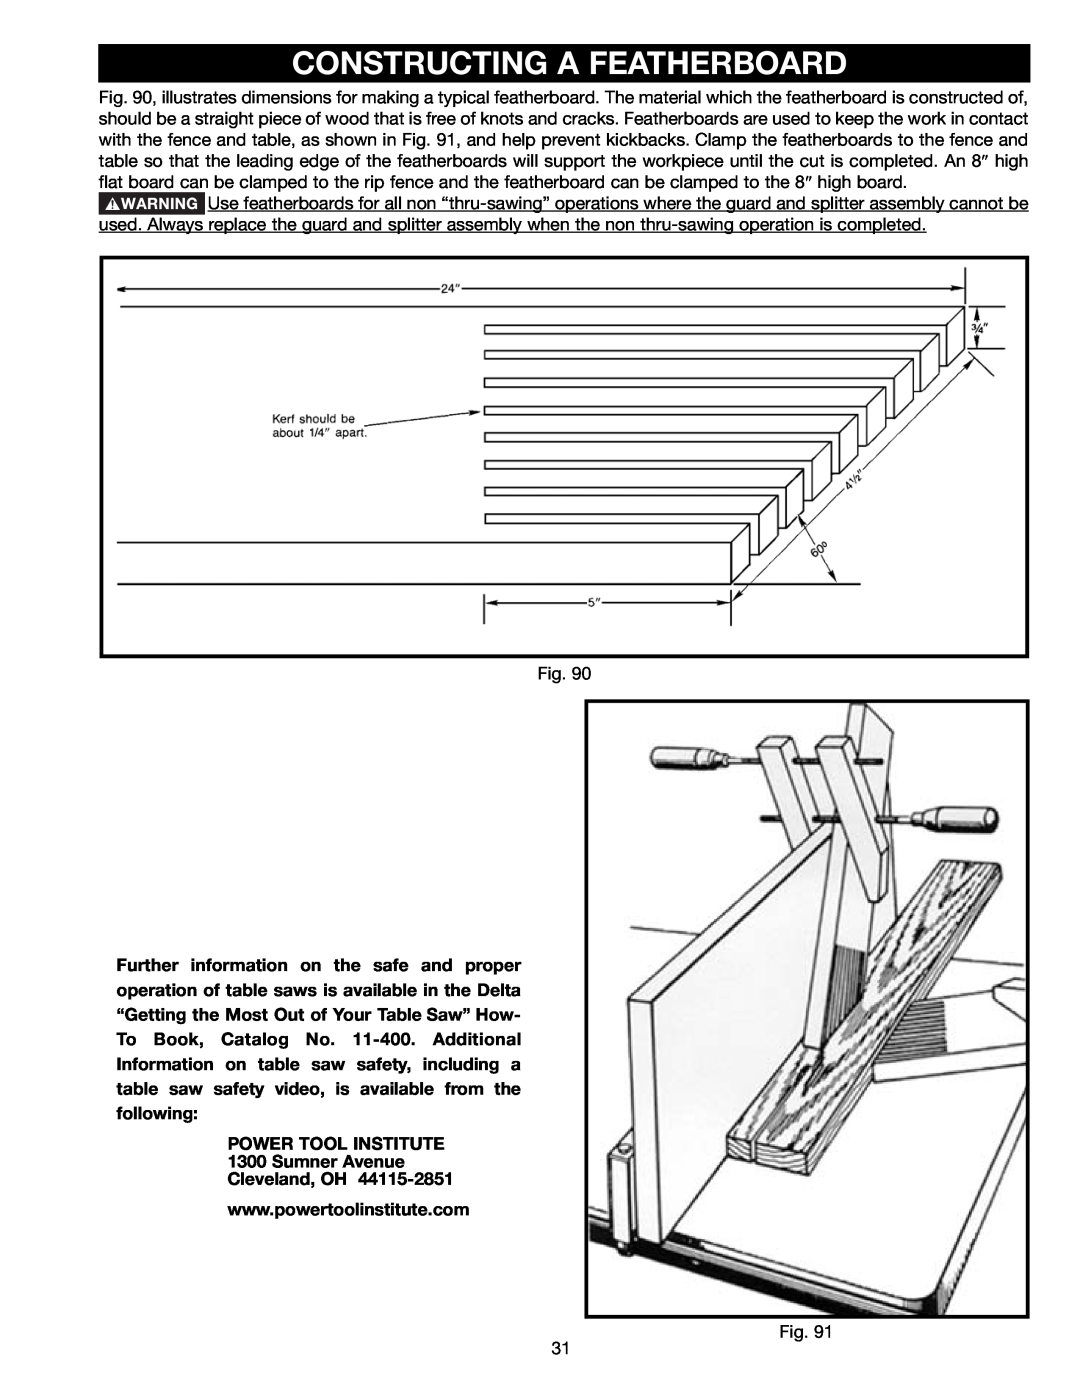 Delta 36-465 instruction manual Constructing A Featherboard, POWER TOOL INSTITUTE 1300 Sumner Avenue Cleveland, OH 